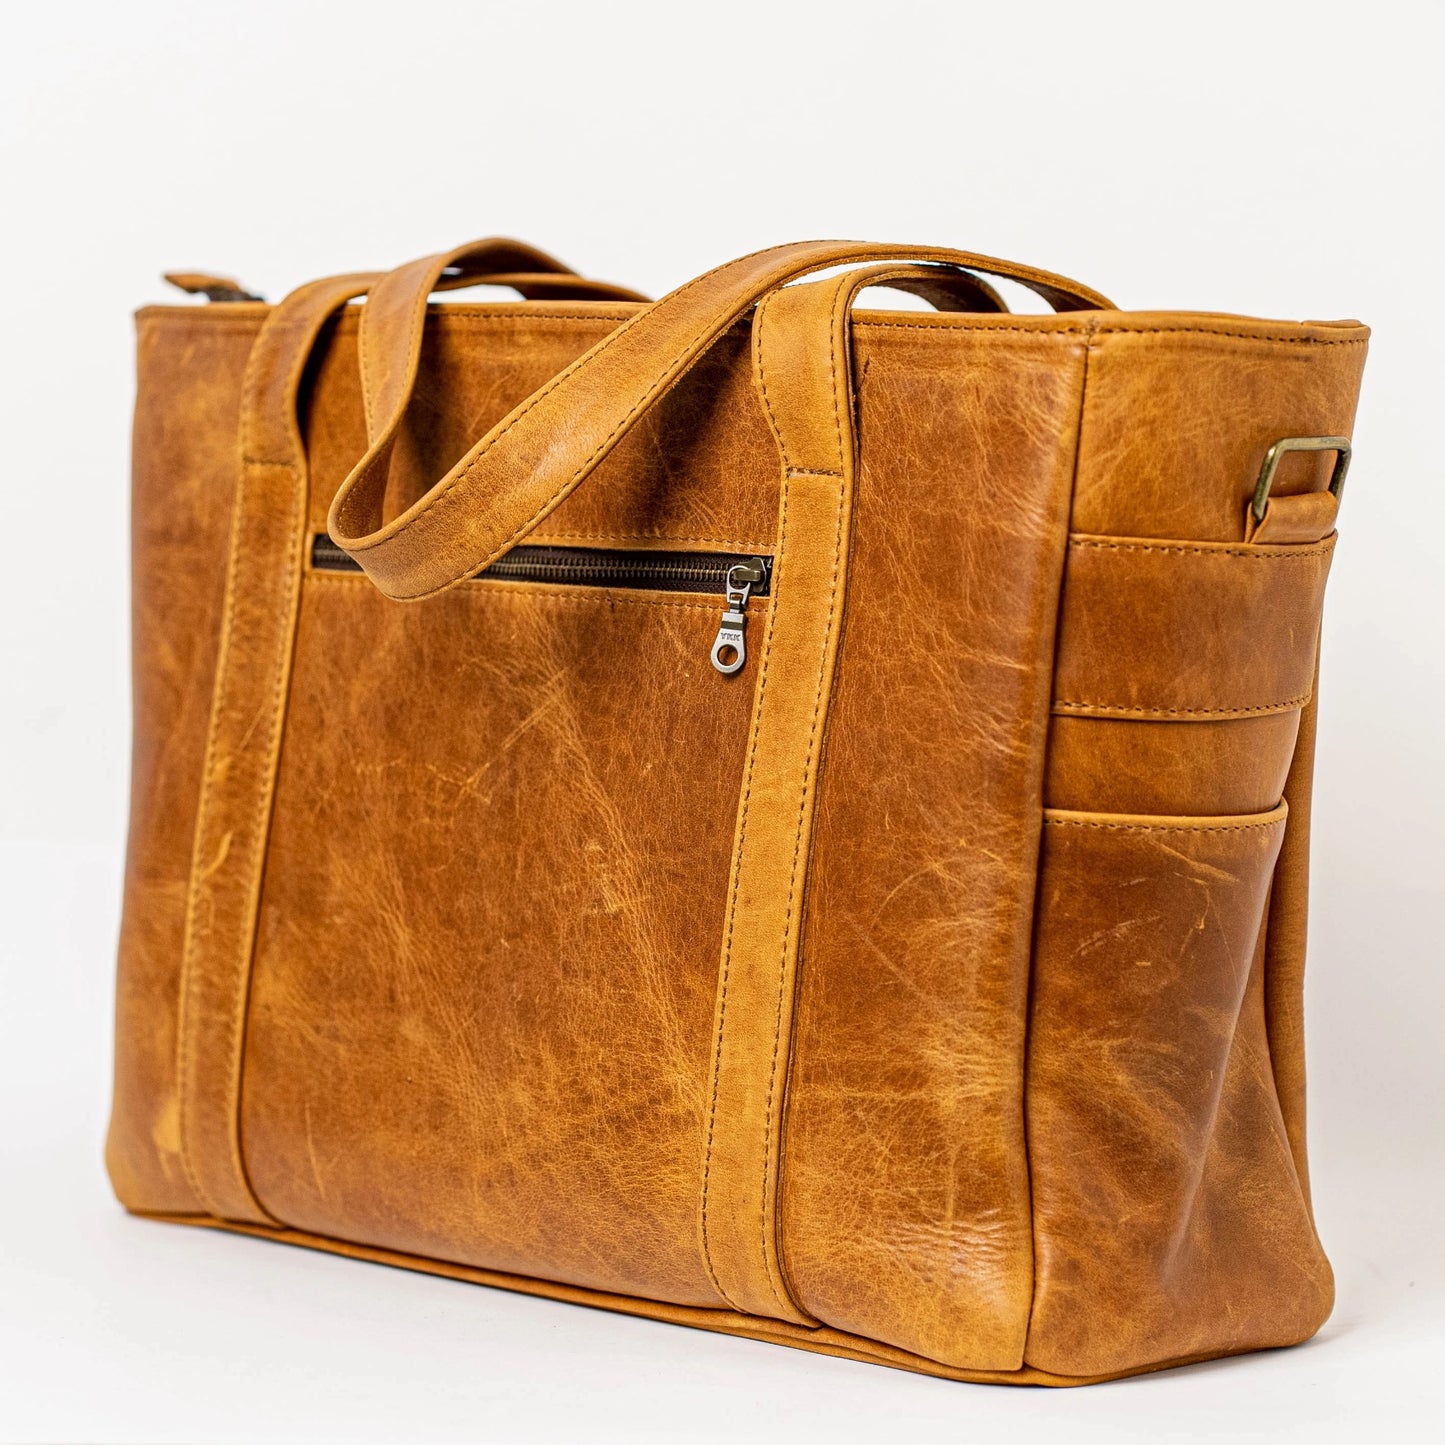 Ladies Laptop bags in Diesel Toffee tan made in Cape Town by Cape Masai leather 